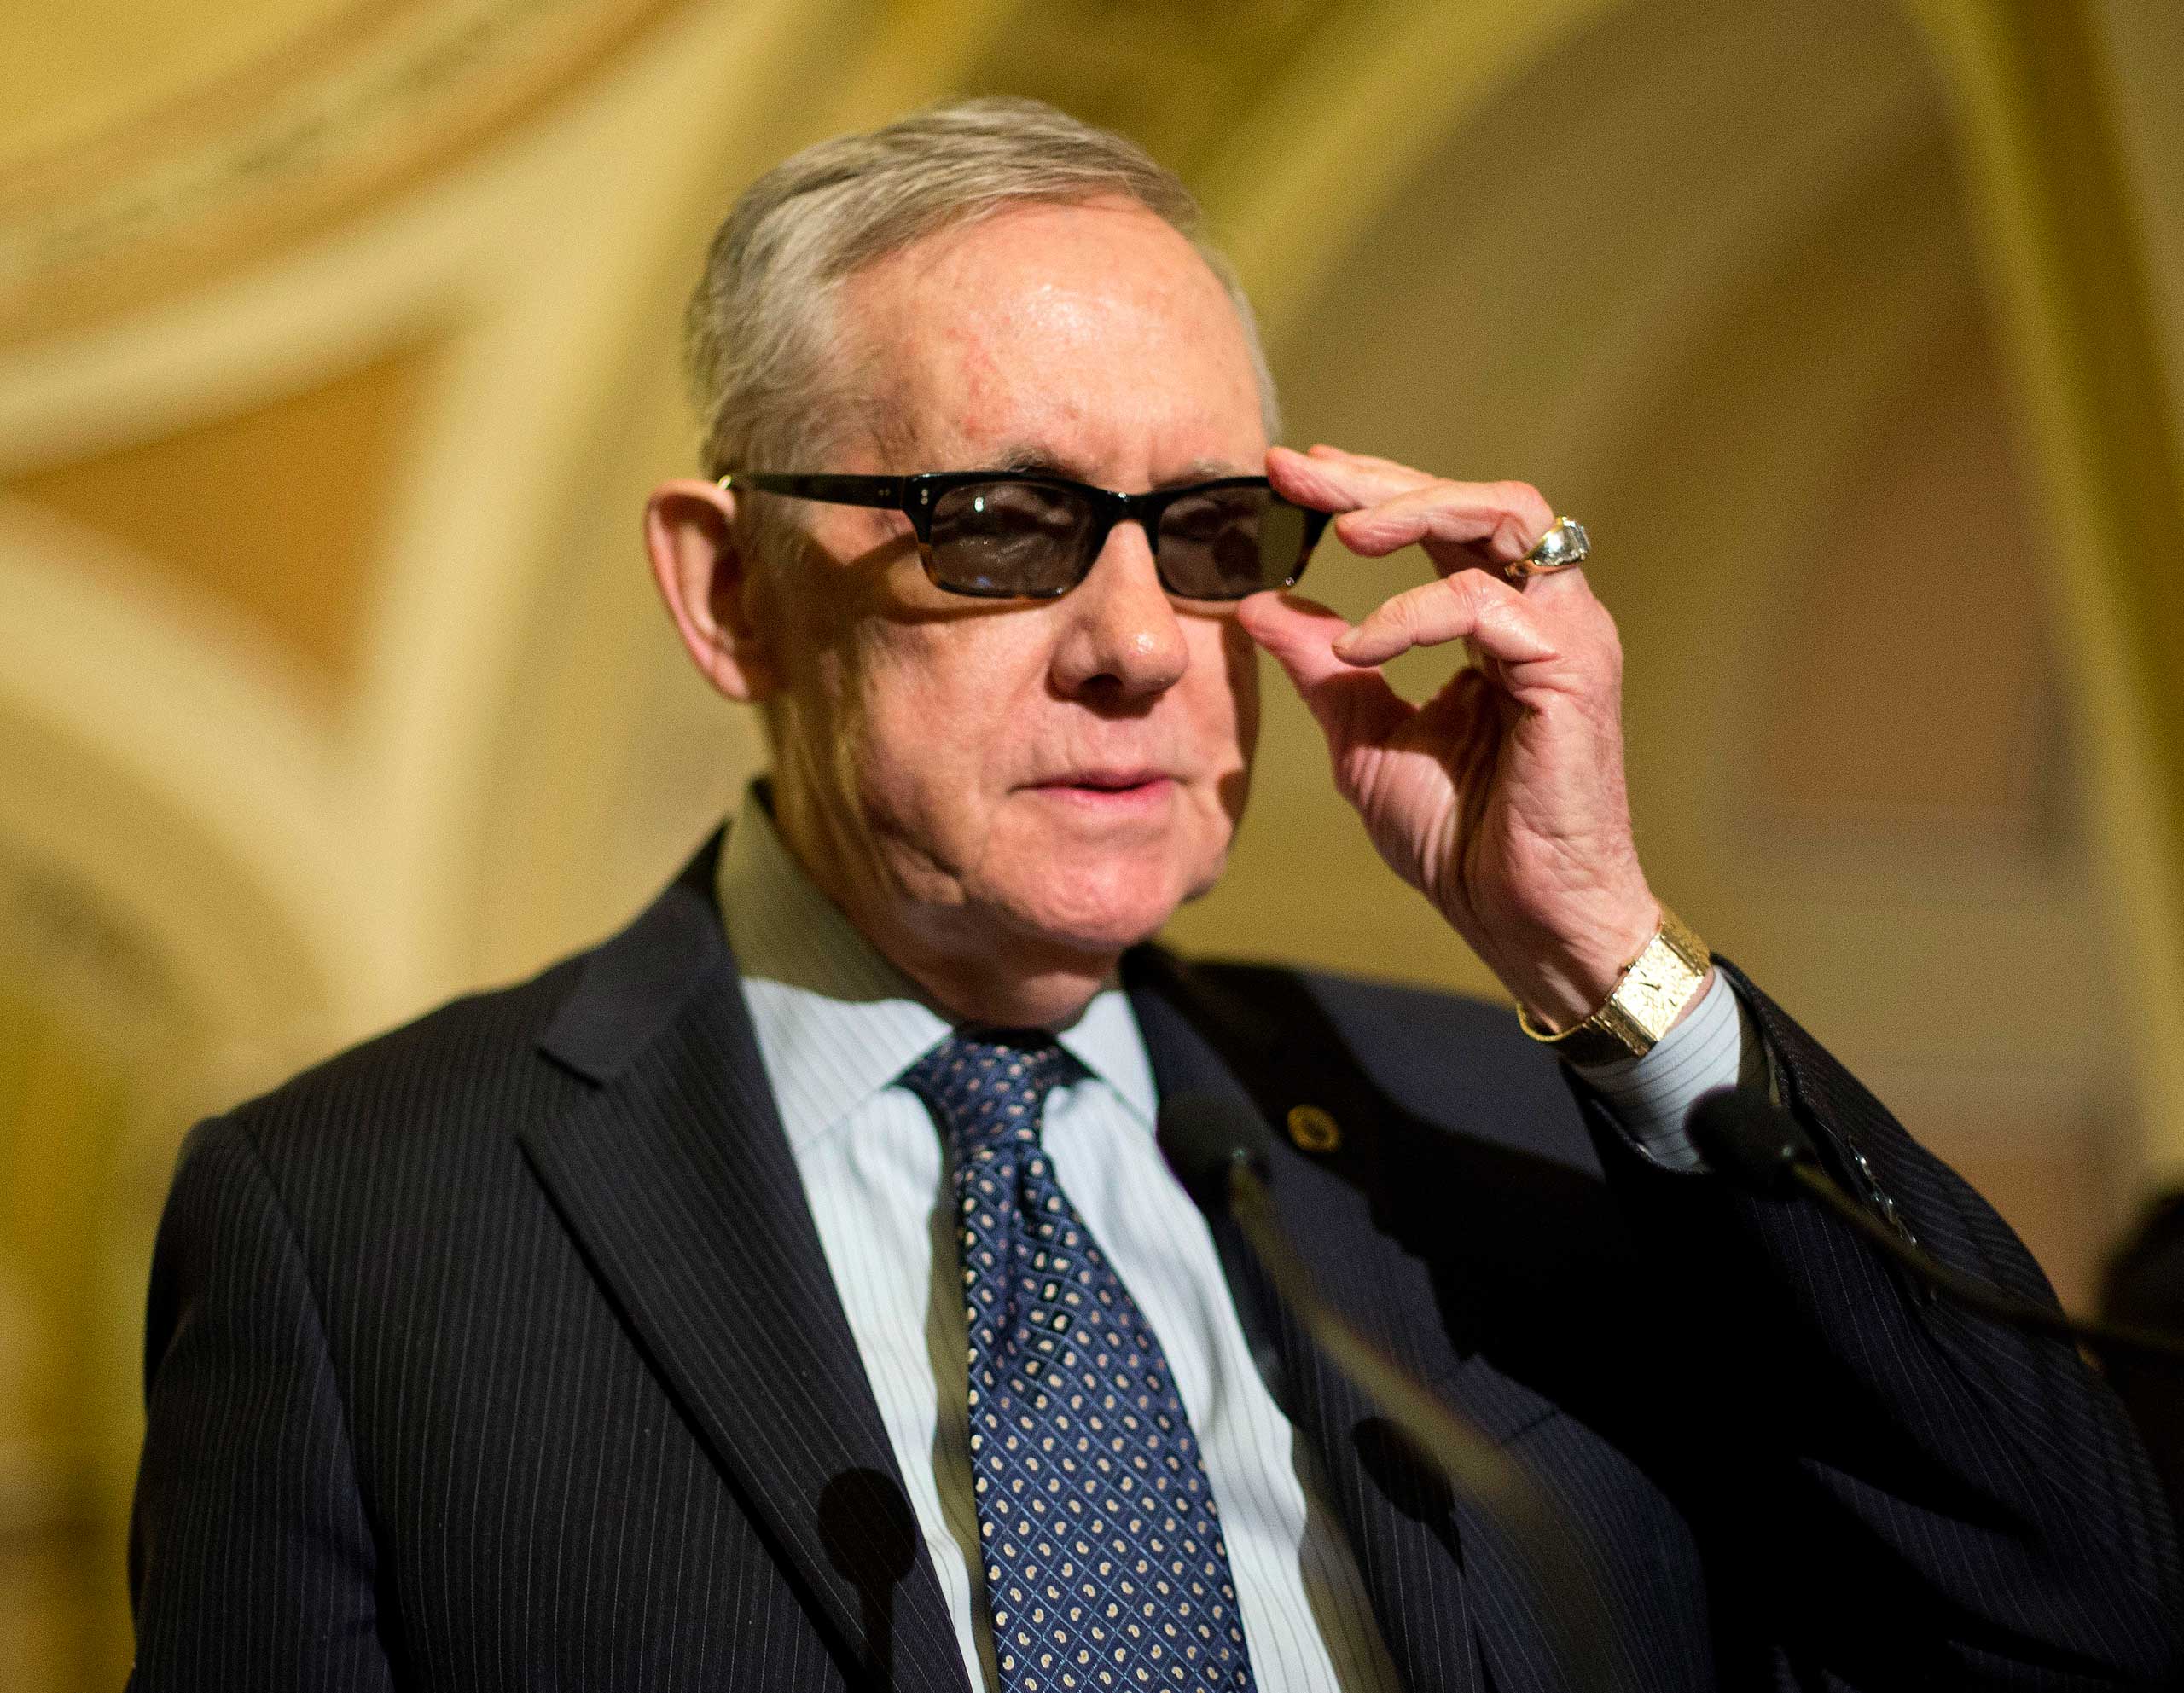 Senate Minority Leader Harry Reid of Nev. adjusts his glasses as he speaks to reporters on Capitol Hill in Washington, March 24, 2015. (Pablo Martinez Monsivais—AP)